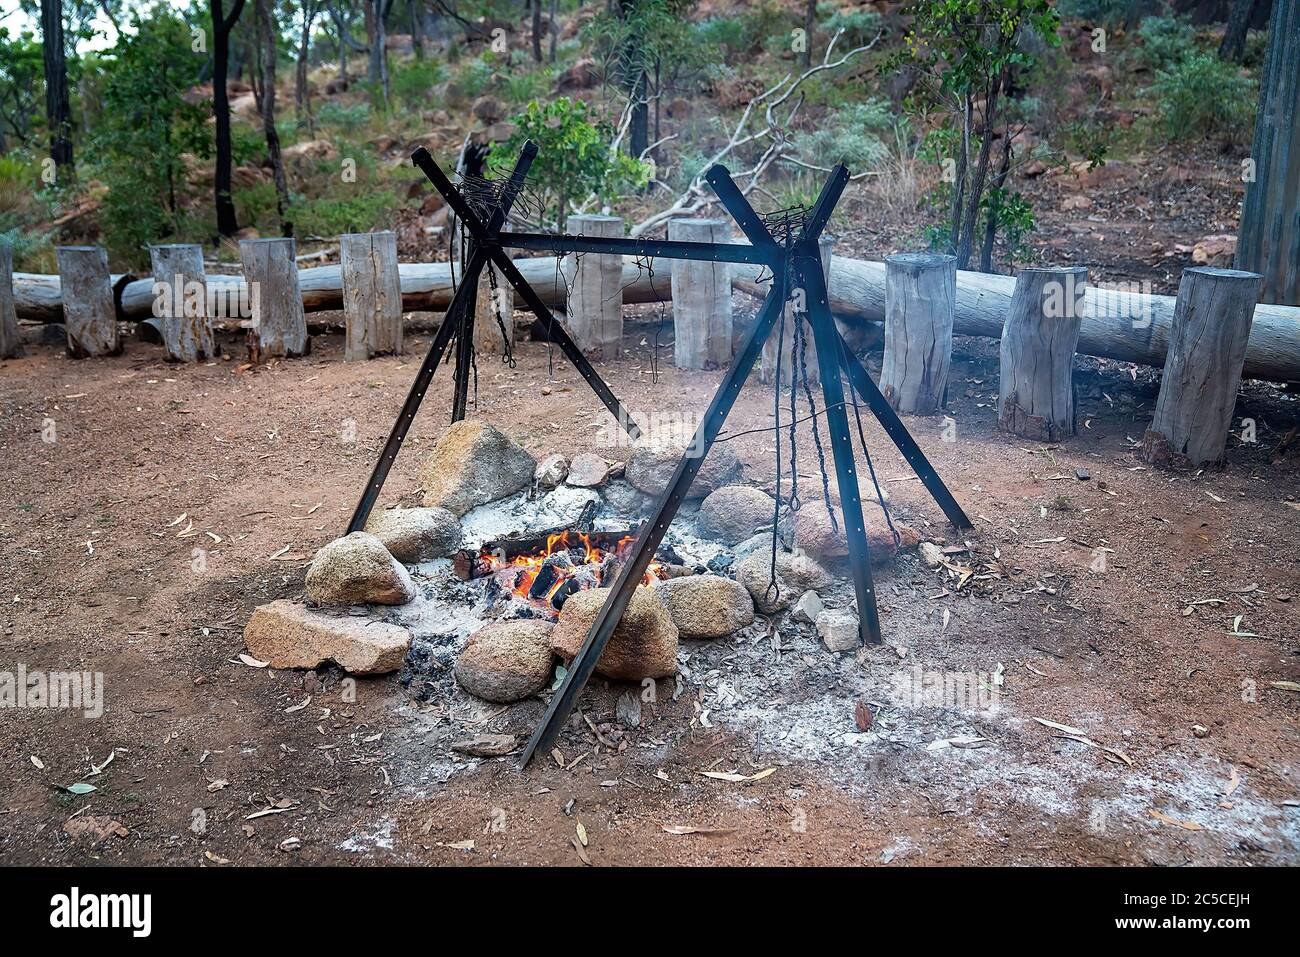 Campfire for a guest bush breakfast at an outback Australian tourist resort in a volcanic national park Stock Photo